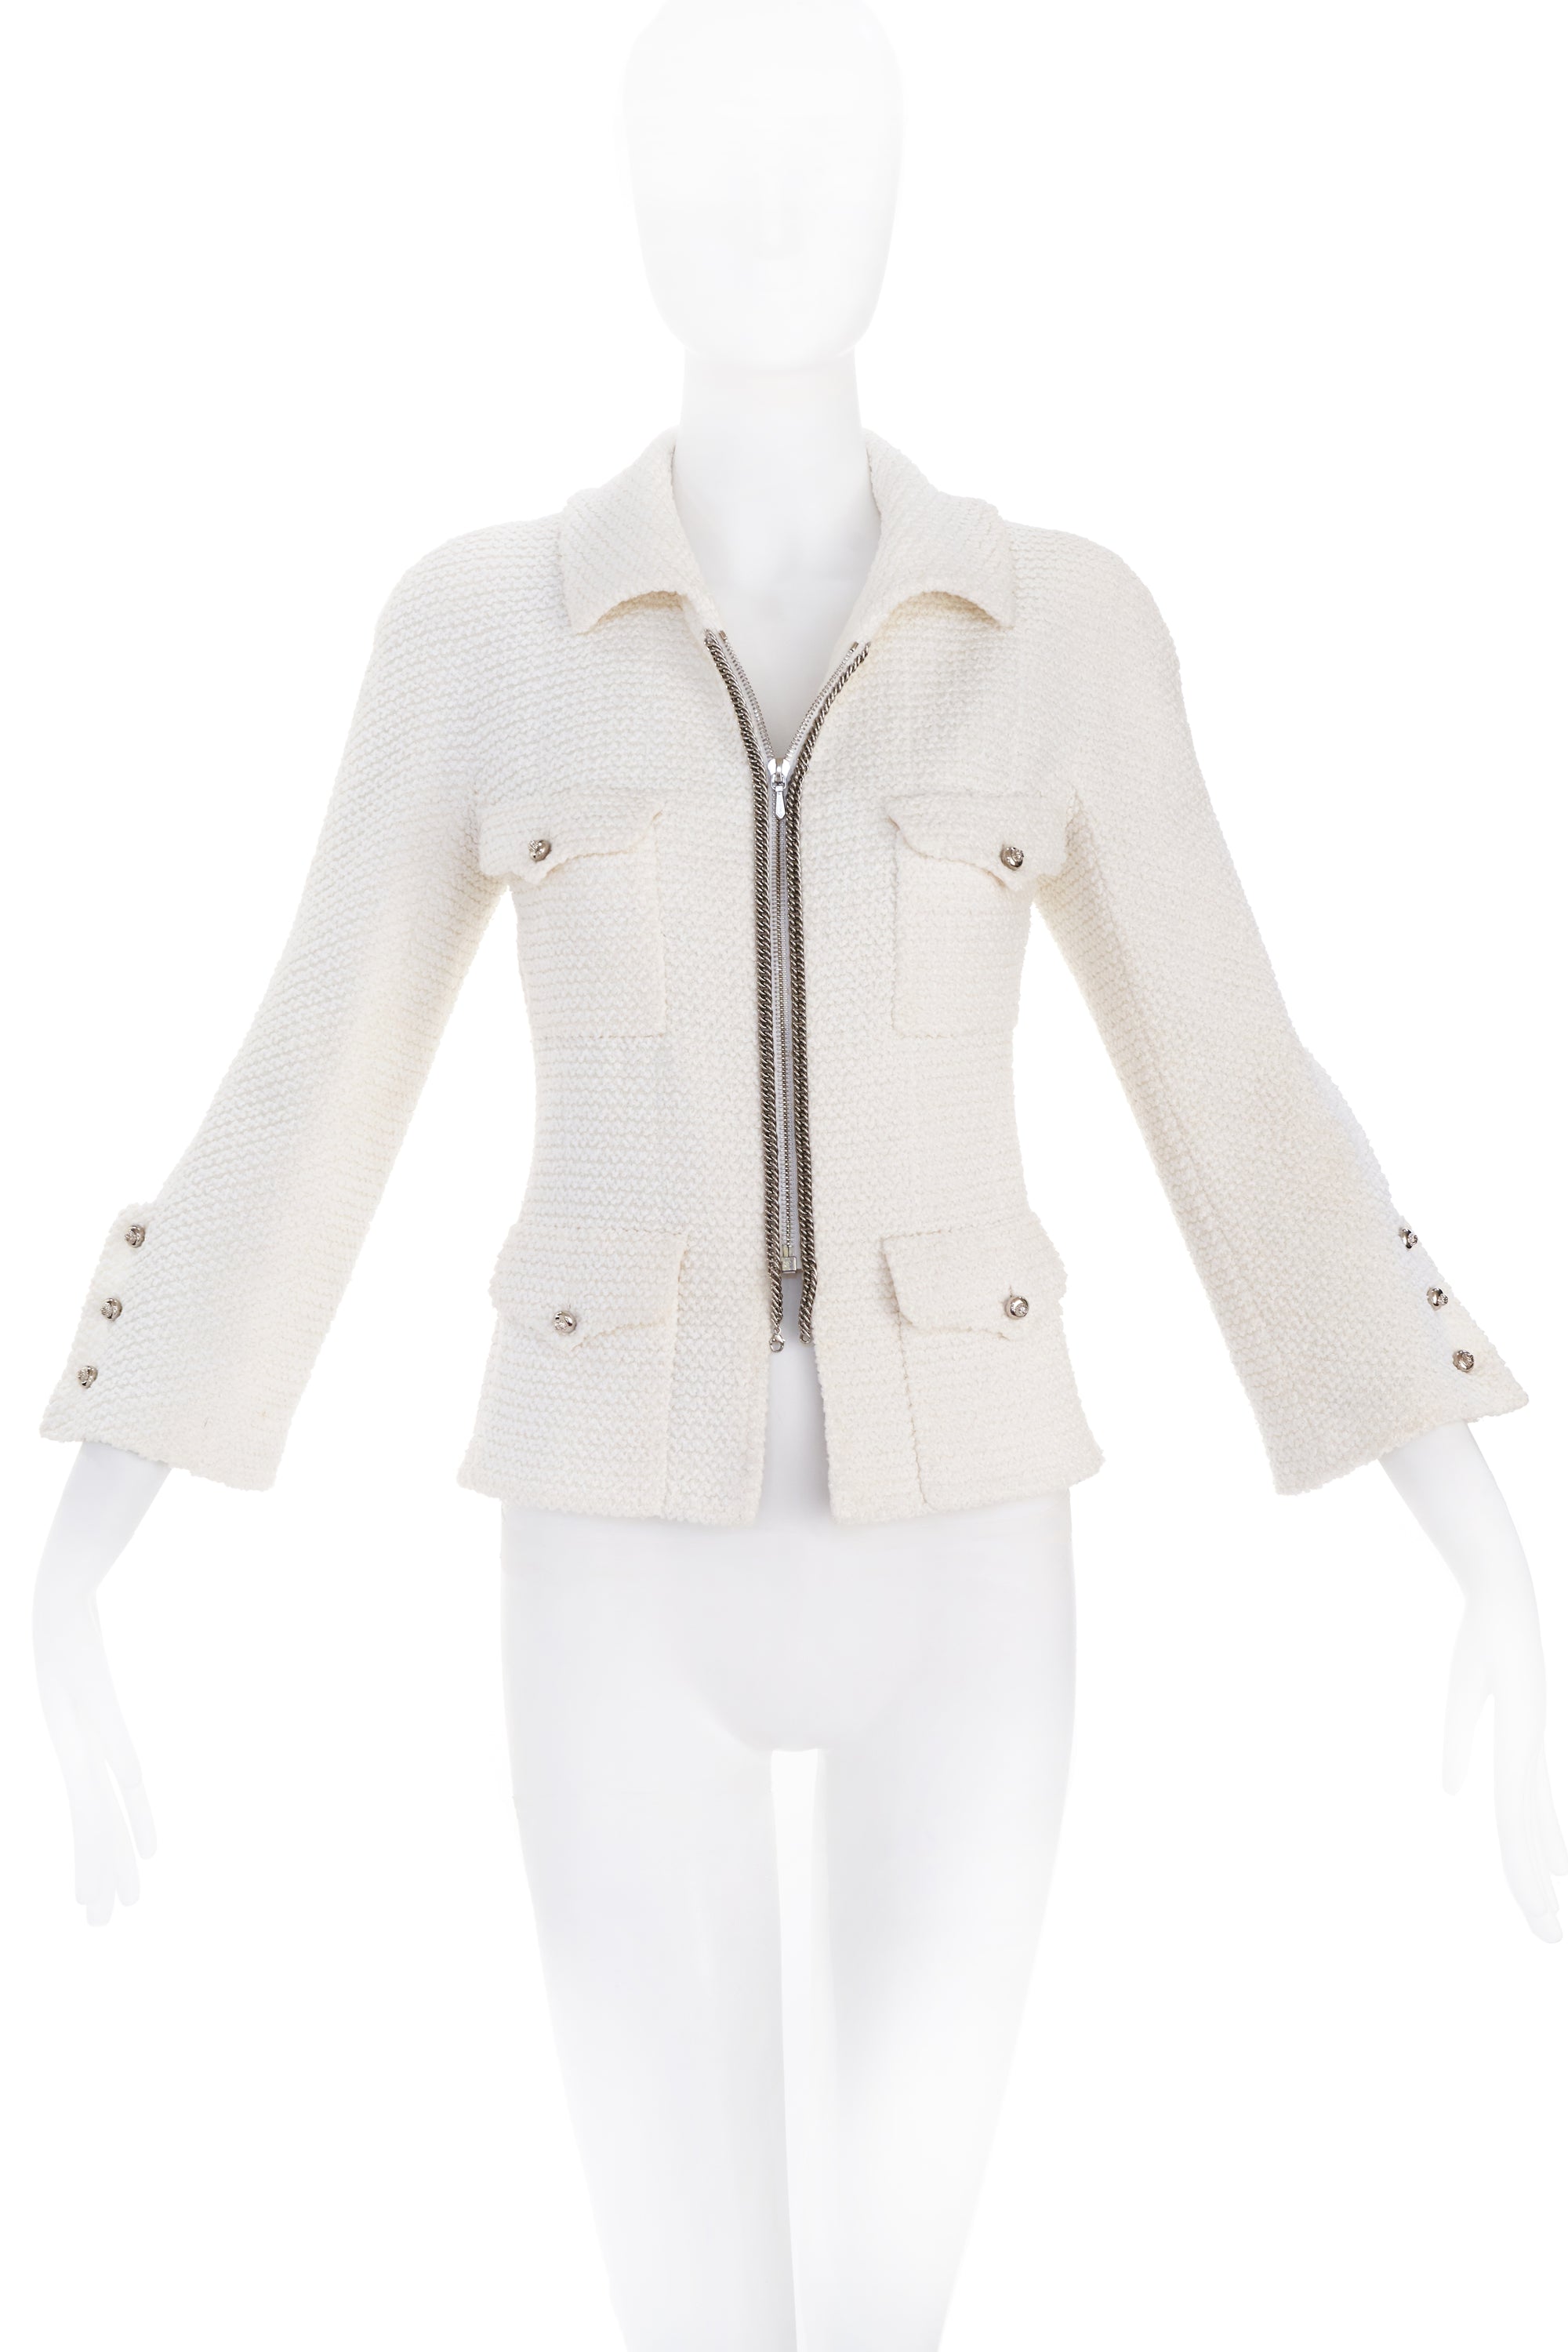 Chanel White Zip Up Jacket with Silver Buttons and Chain Detail